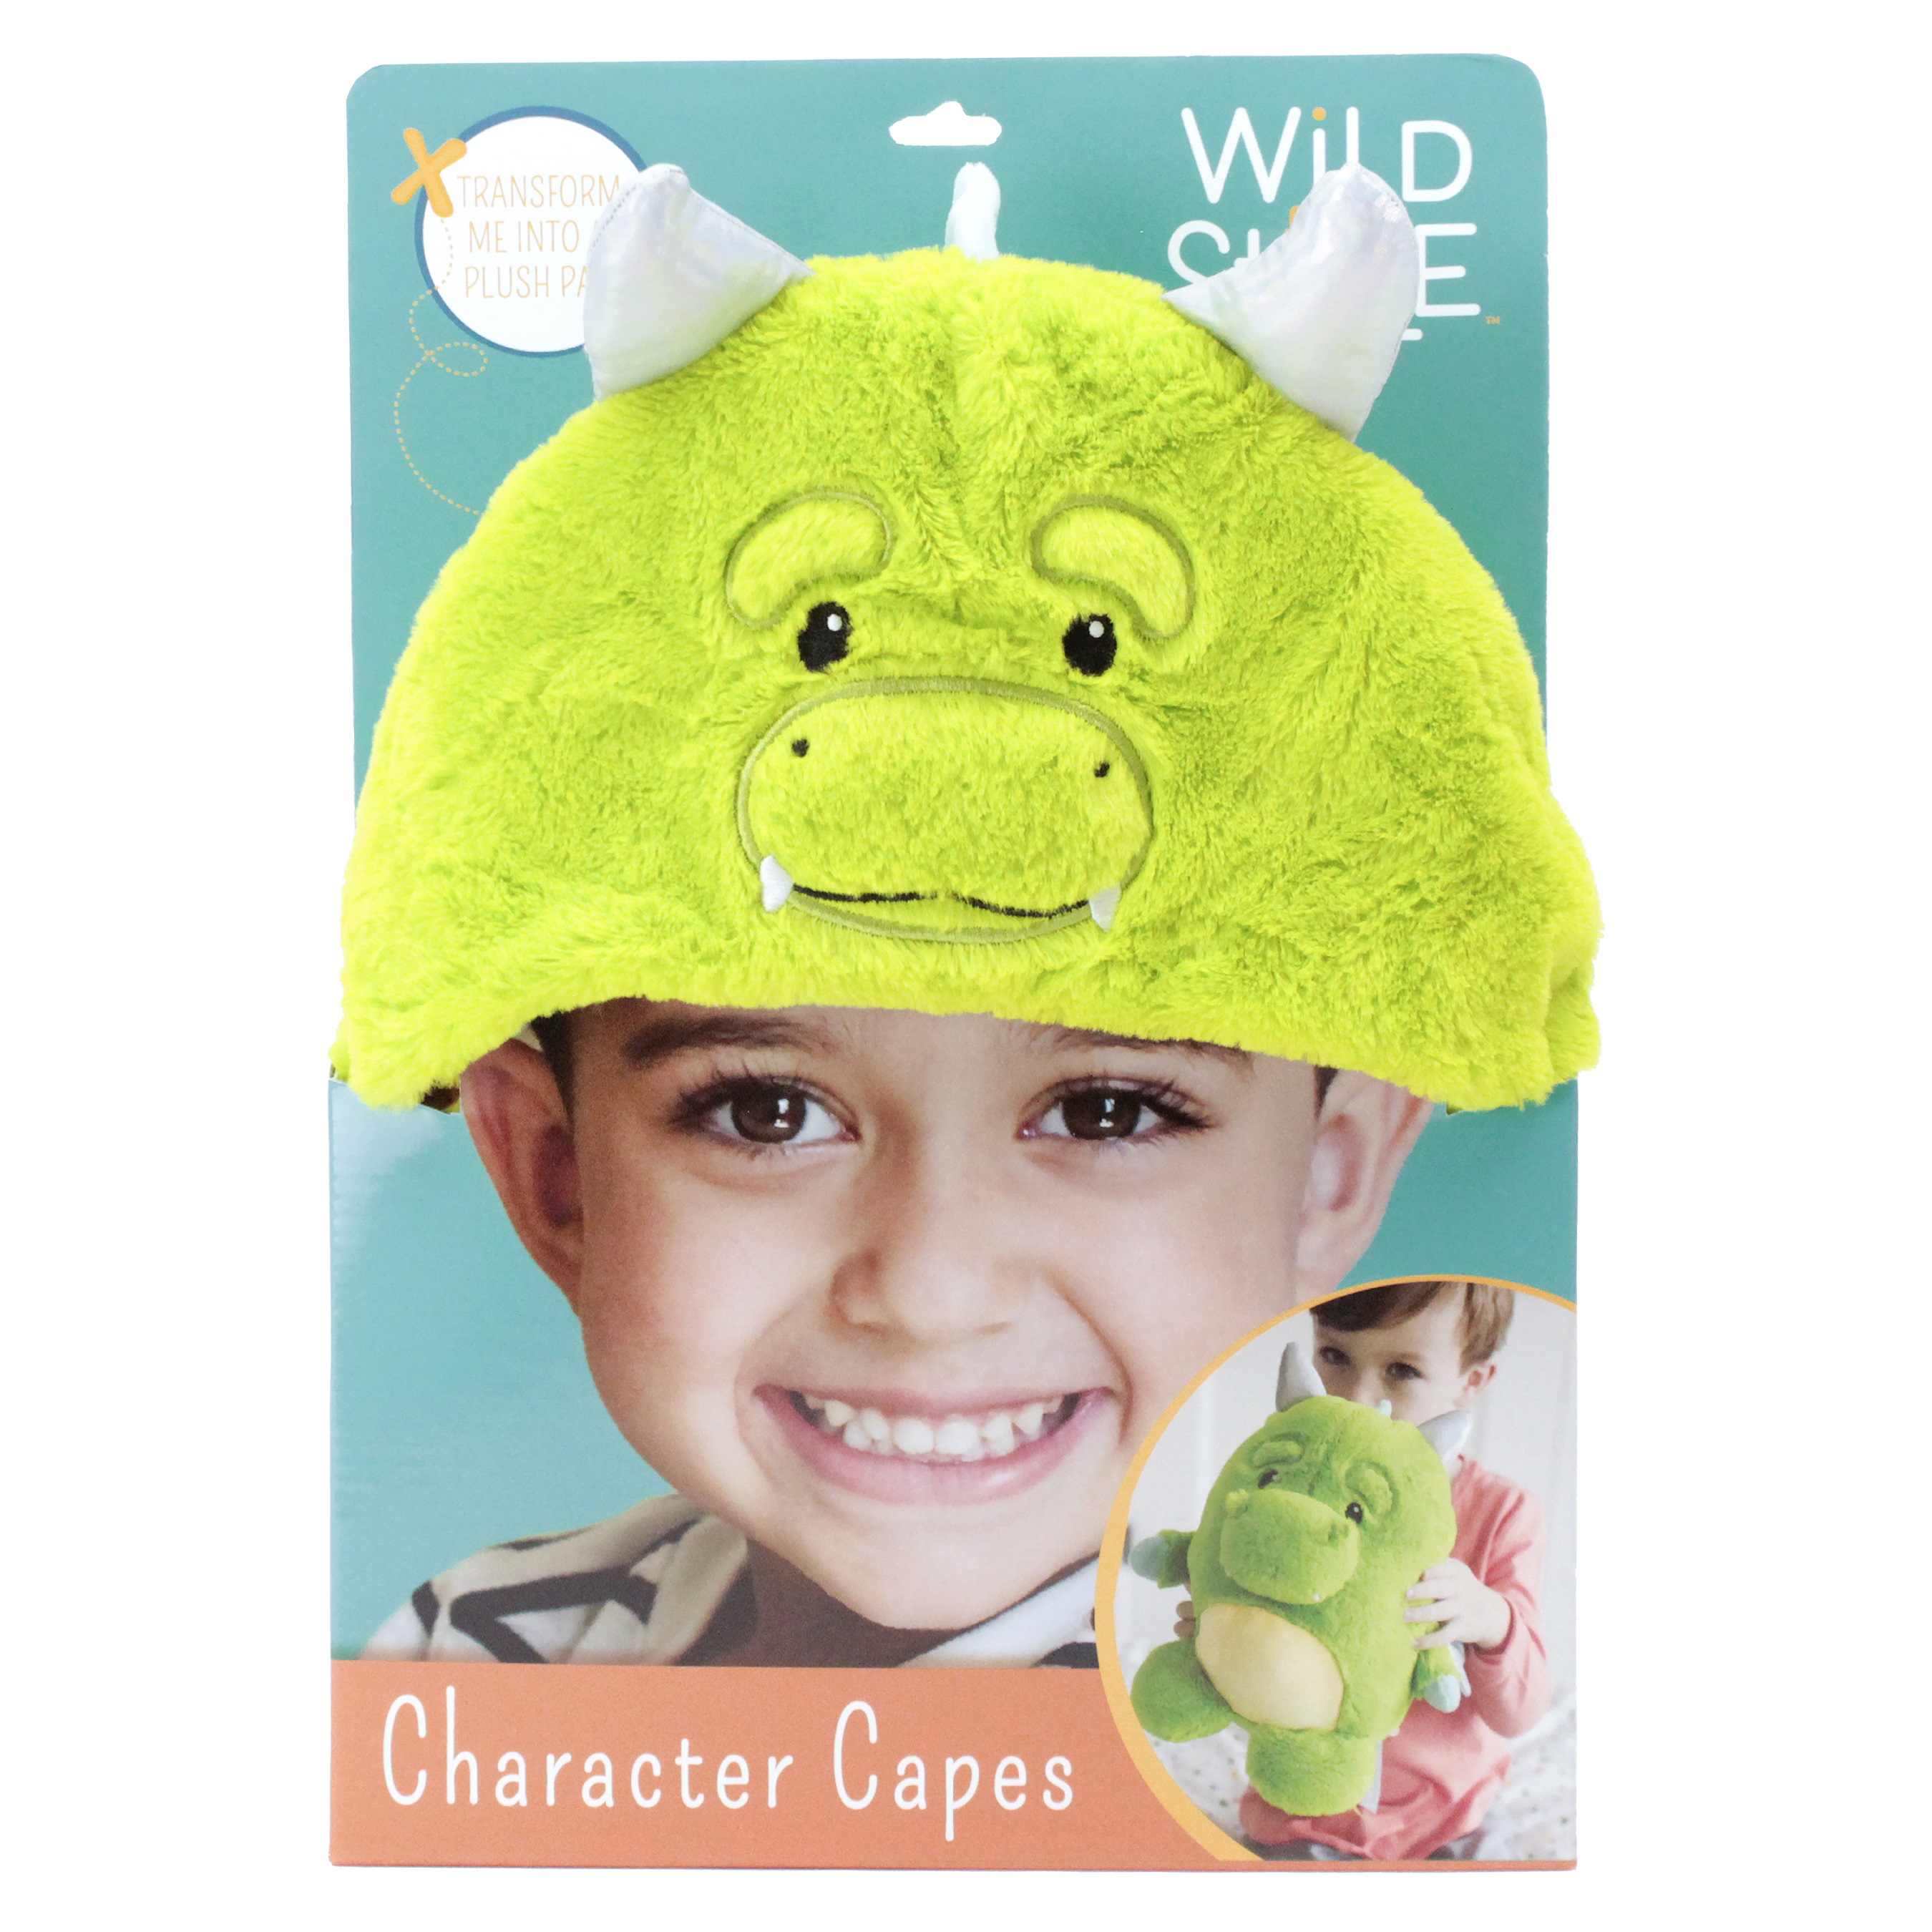 Animal Adventure® Wild for Style™ 2-in-1 Transformable Character Cape & Plush Pal – Dragon - image 7 of 7